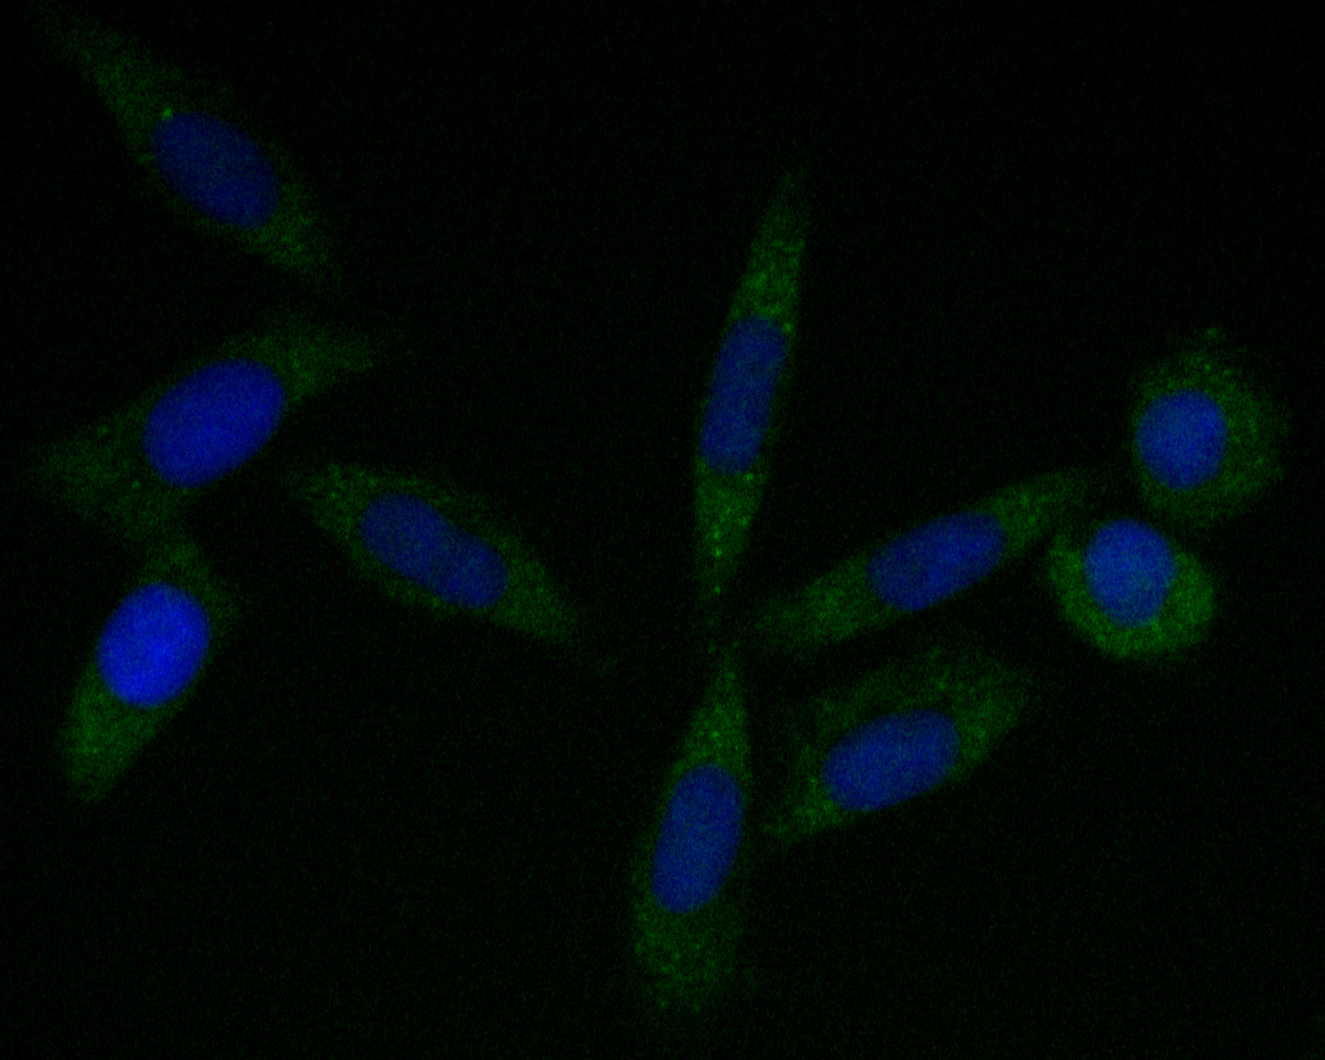 ICC staining of Tropomodulin 2 in SiHa cells (green). Formalin fixed cells were permeabilized with 0.1% Triton X-100 in TBS for 10 minutes at room temperature and blocked with 1% Blocker BSA for 15 minutes at room temperature. Cells were probed with the primary antibody (ET7110-27, 1/50) for 1 hour at room temperature, washed with PBS. Alexa Fluor®488 Goat anti-Rabbit IgG was used as the secondary antibody at 1/1,000 dilution. The nuclear counter stain is DAPI (blue).